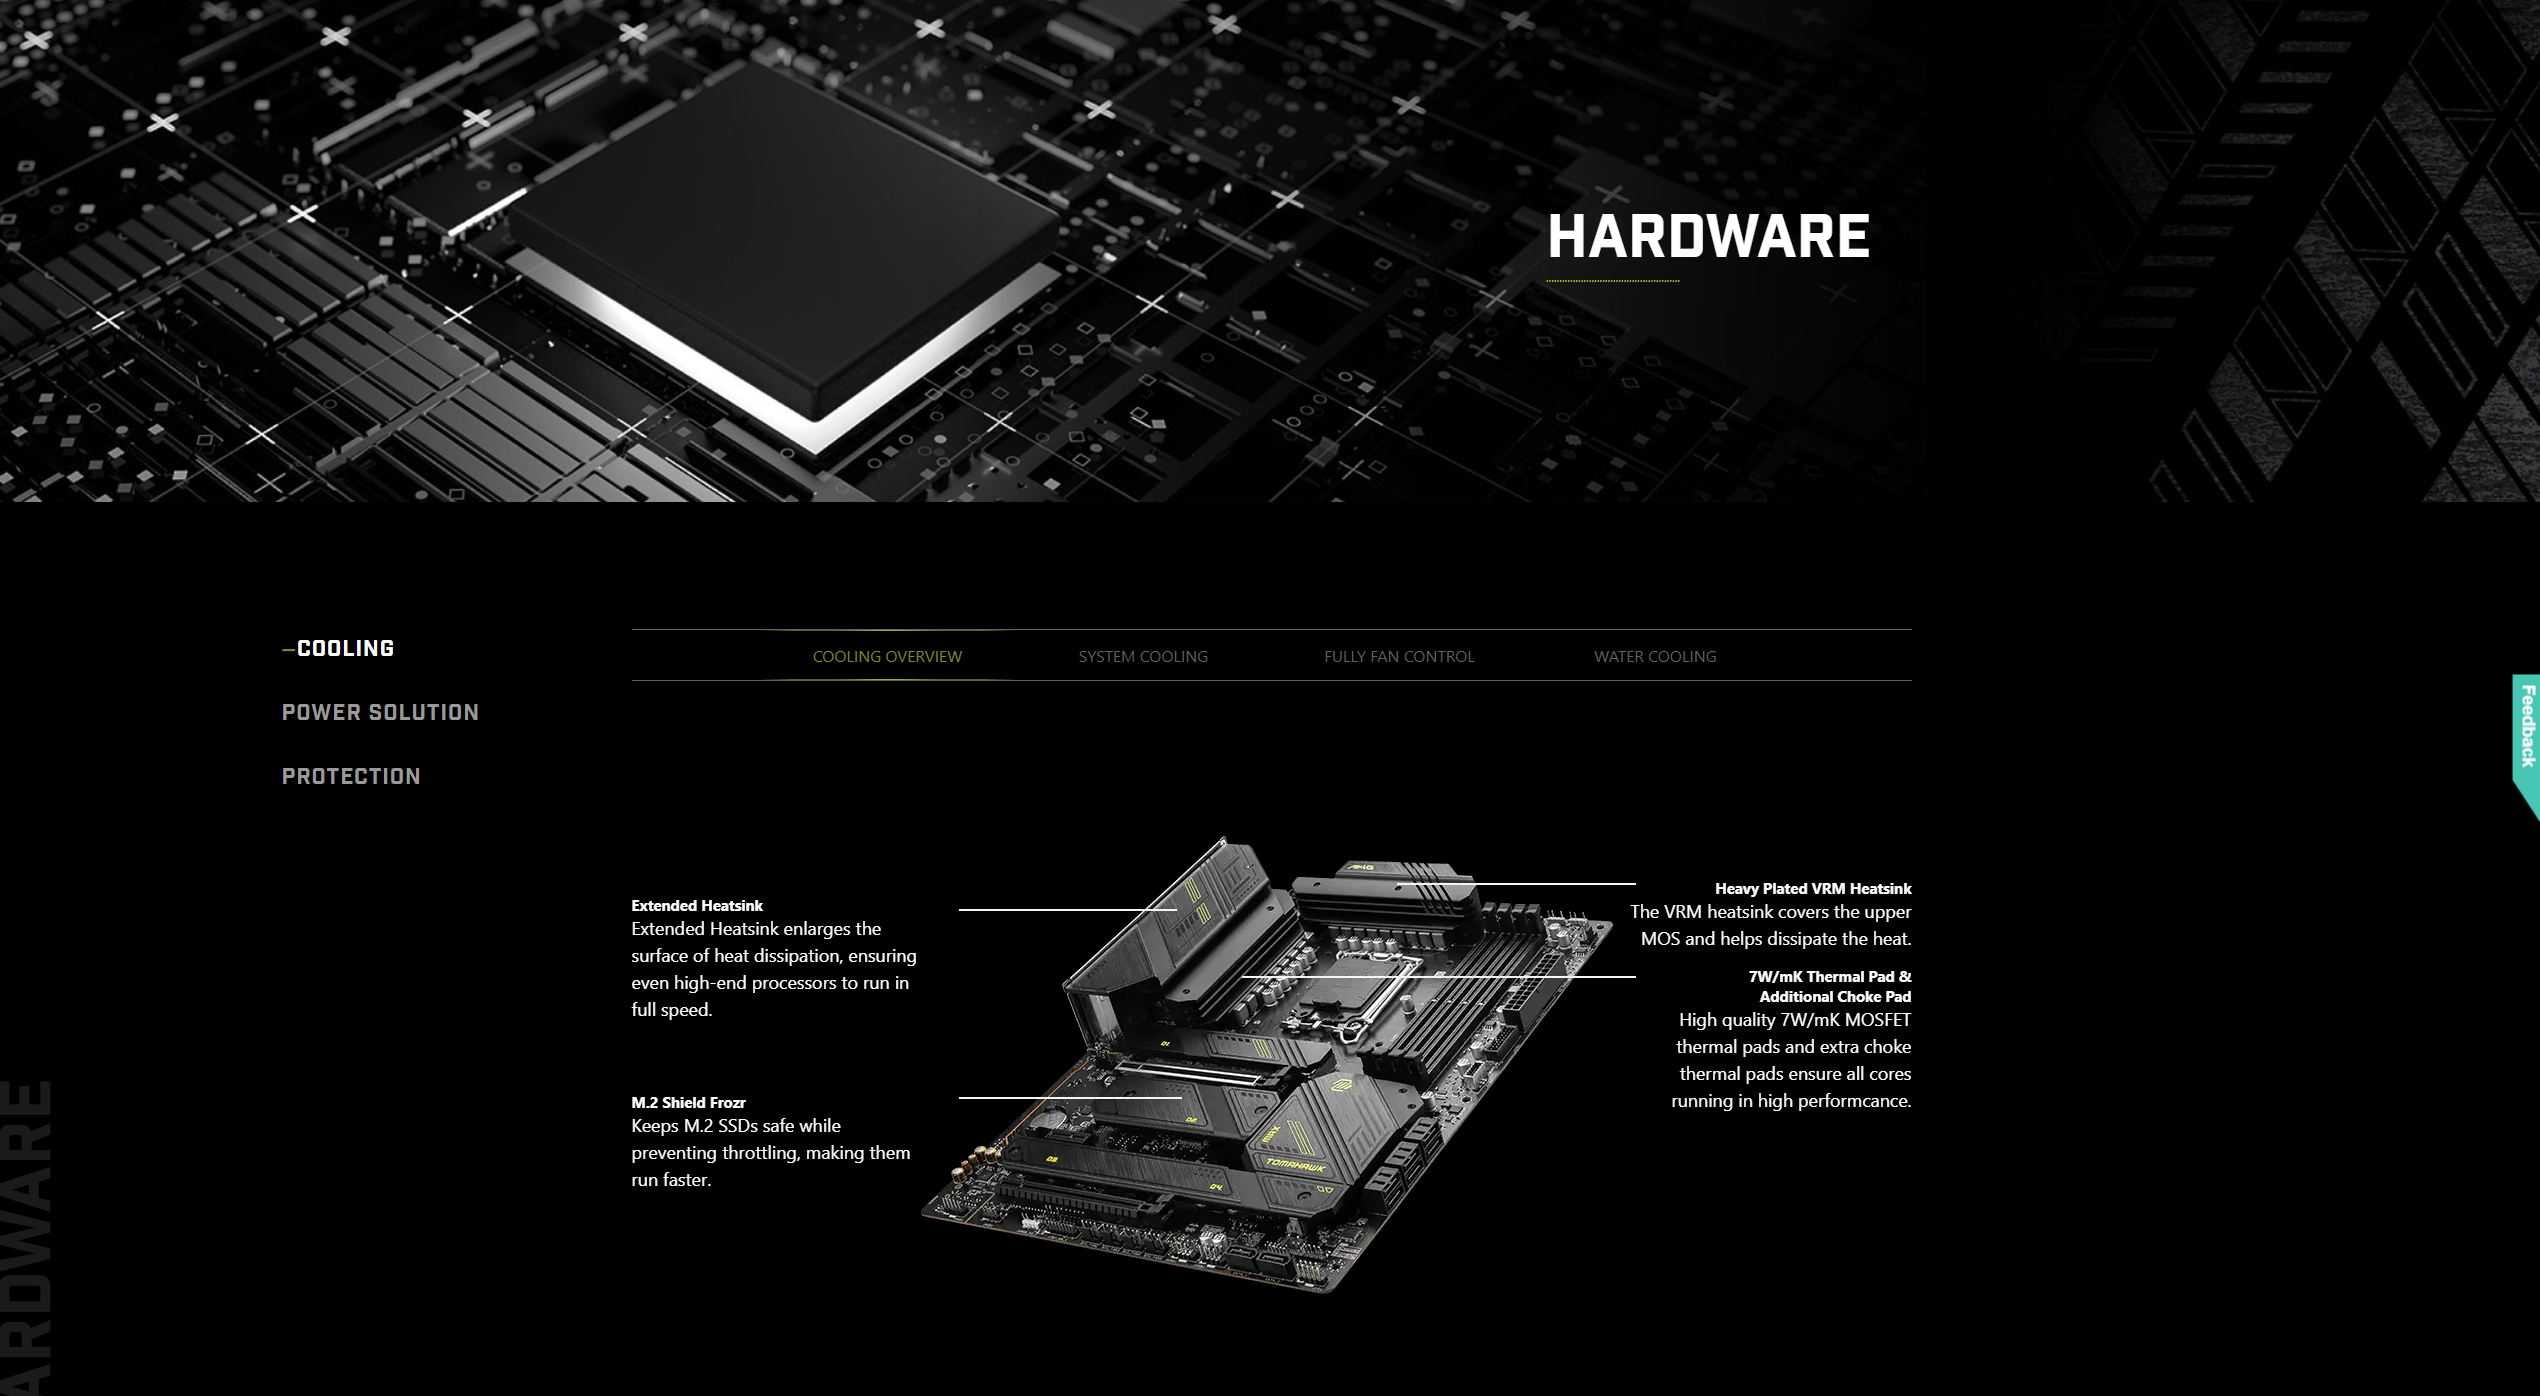 A large marketing image providing additional information about the product MSI MAG Z790 Tomahawk Max Wifi LGA1700 ATX Desktop Motherboard - Additional alt info not provided